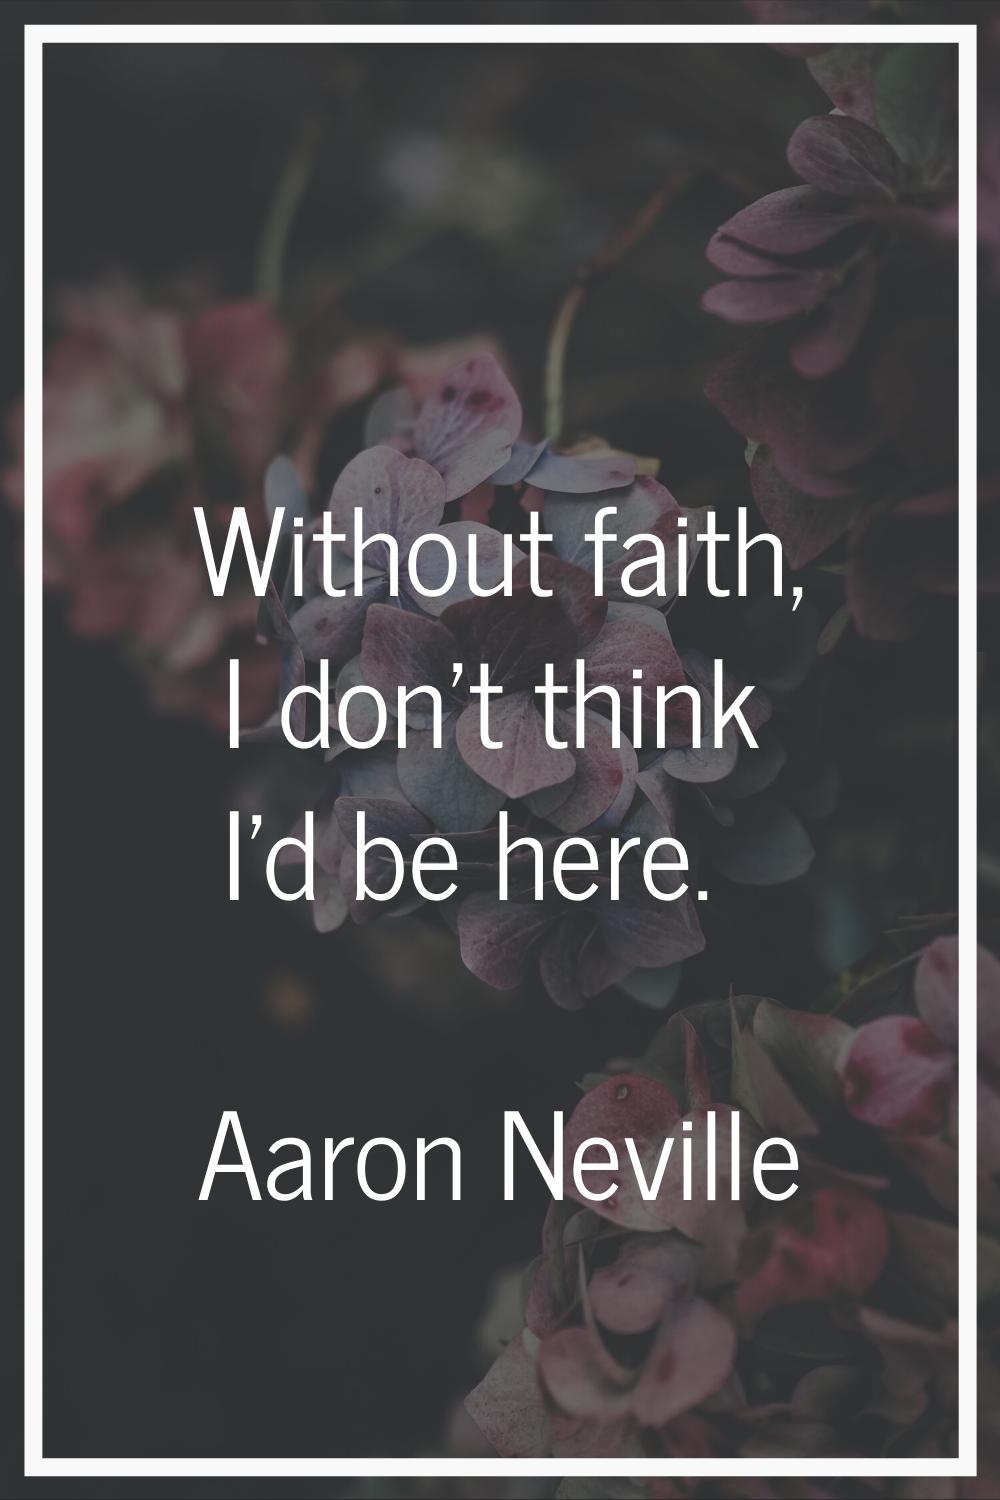 Without faith, I don't think I'd be here.